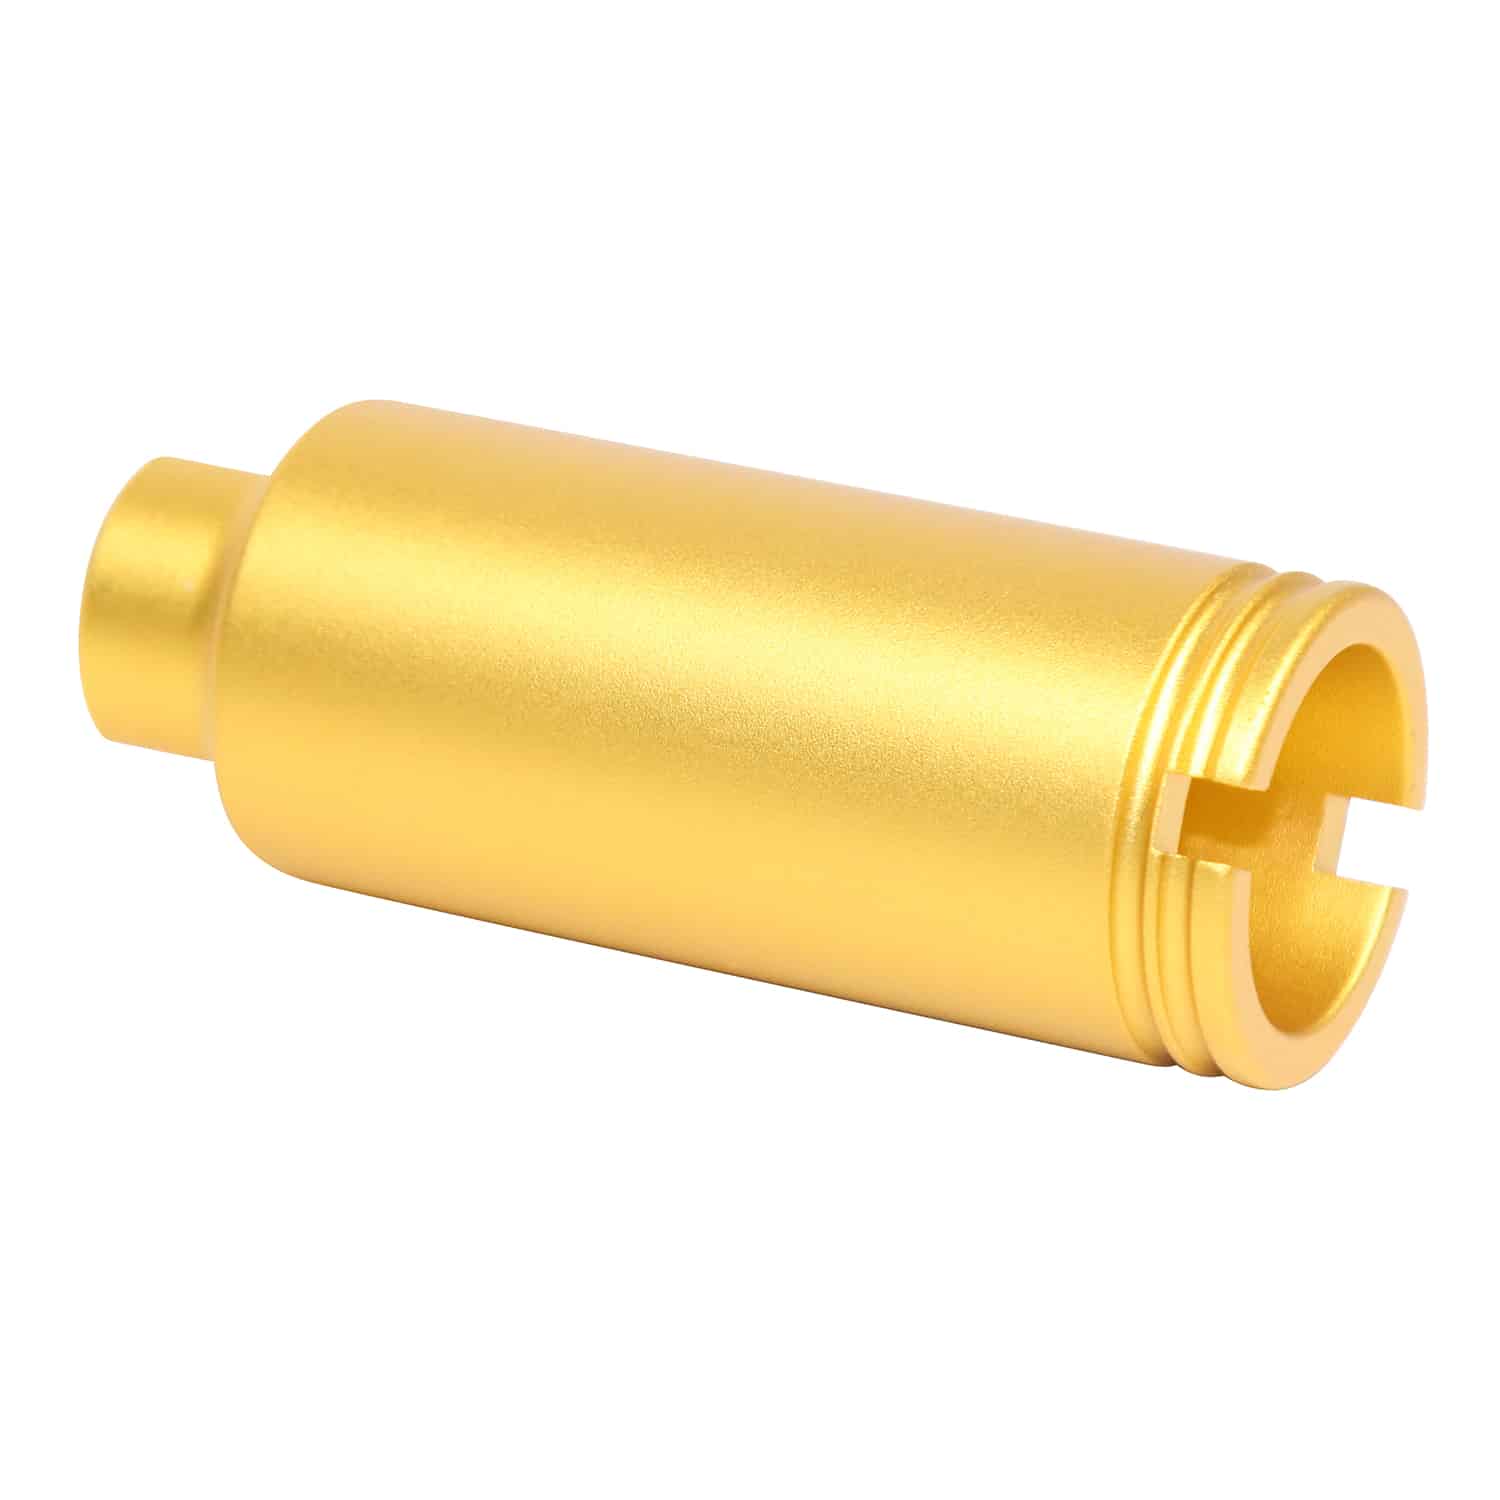 AR-15 Slim Line Cone Flash Can (Anodized Gold)